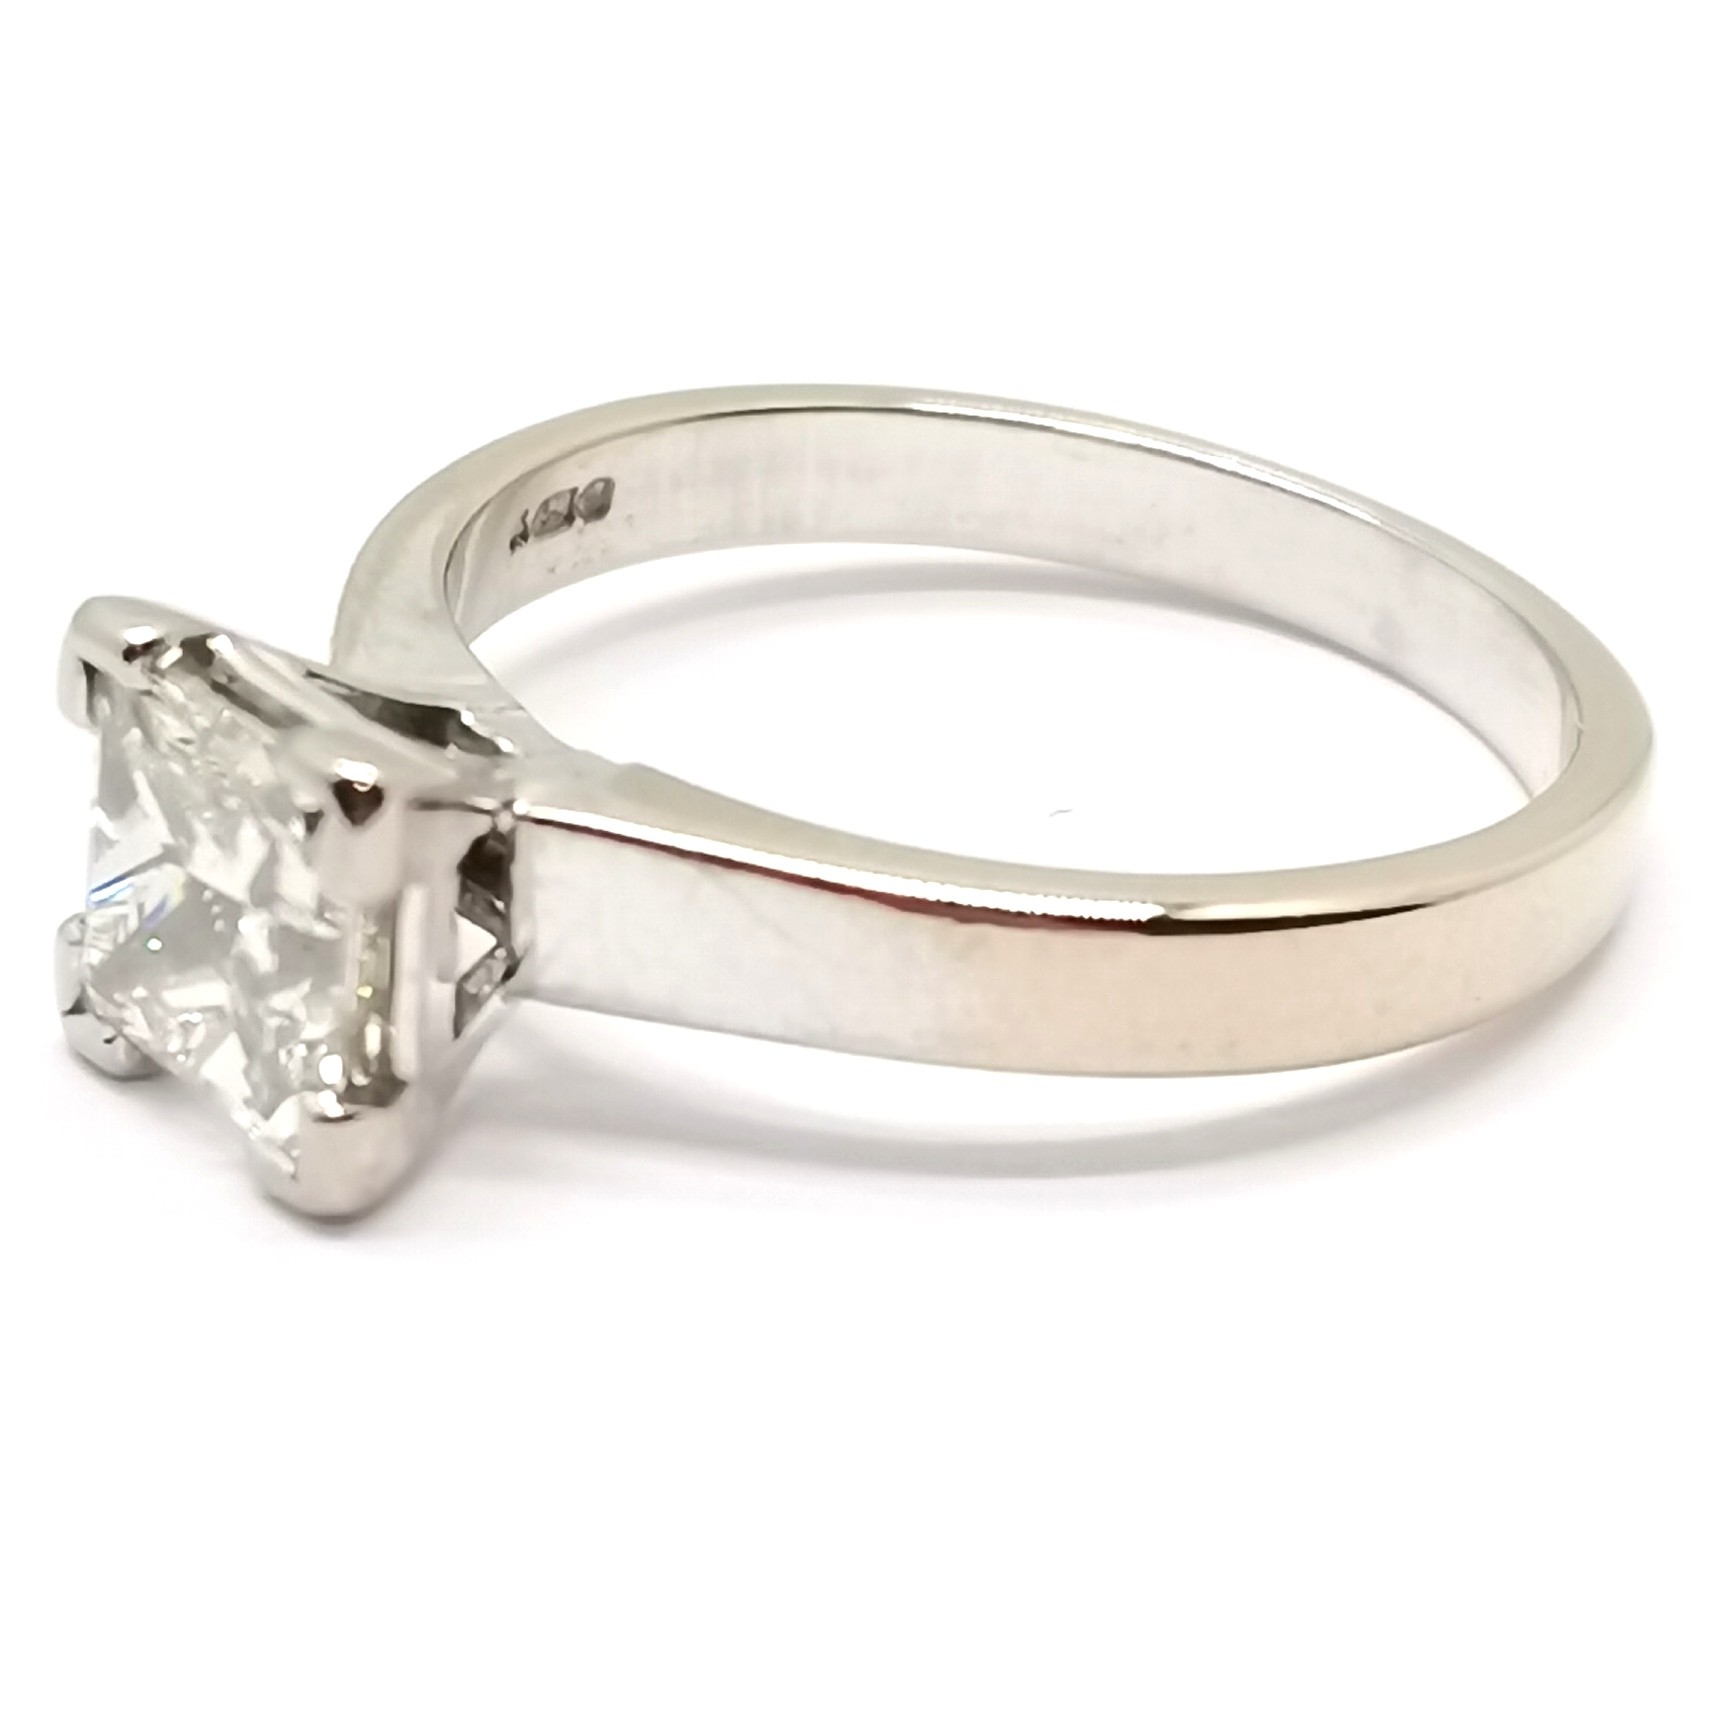 18ct hallmarked white gold princess cut diamond solitaire ring with certificate stating carat weight - Image 6 of 7